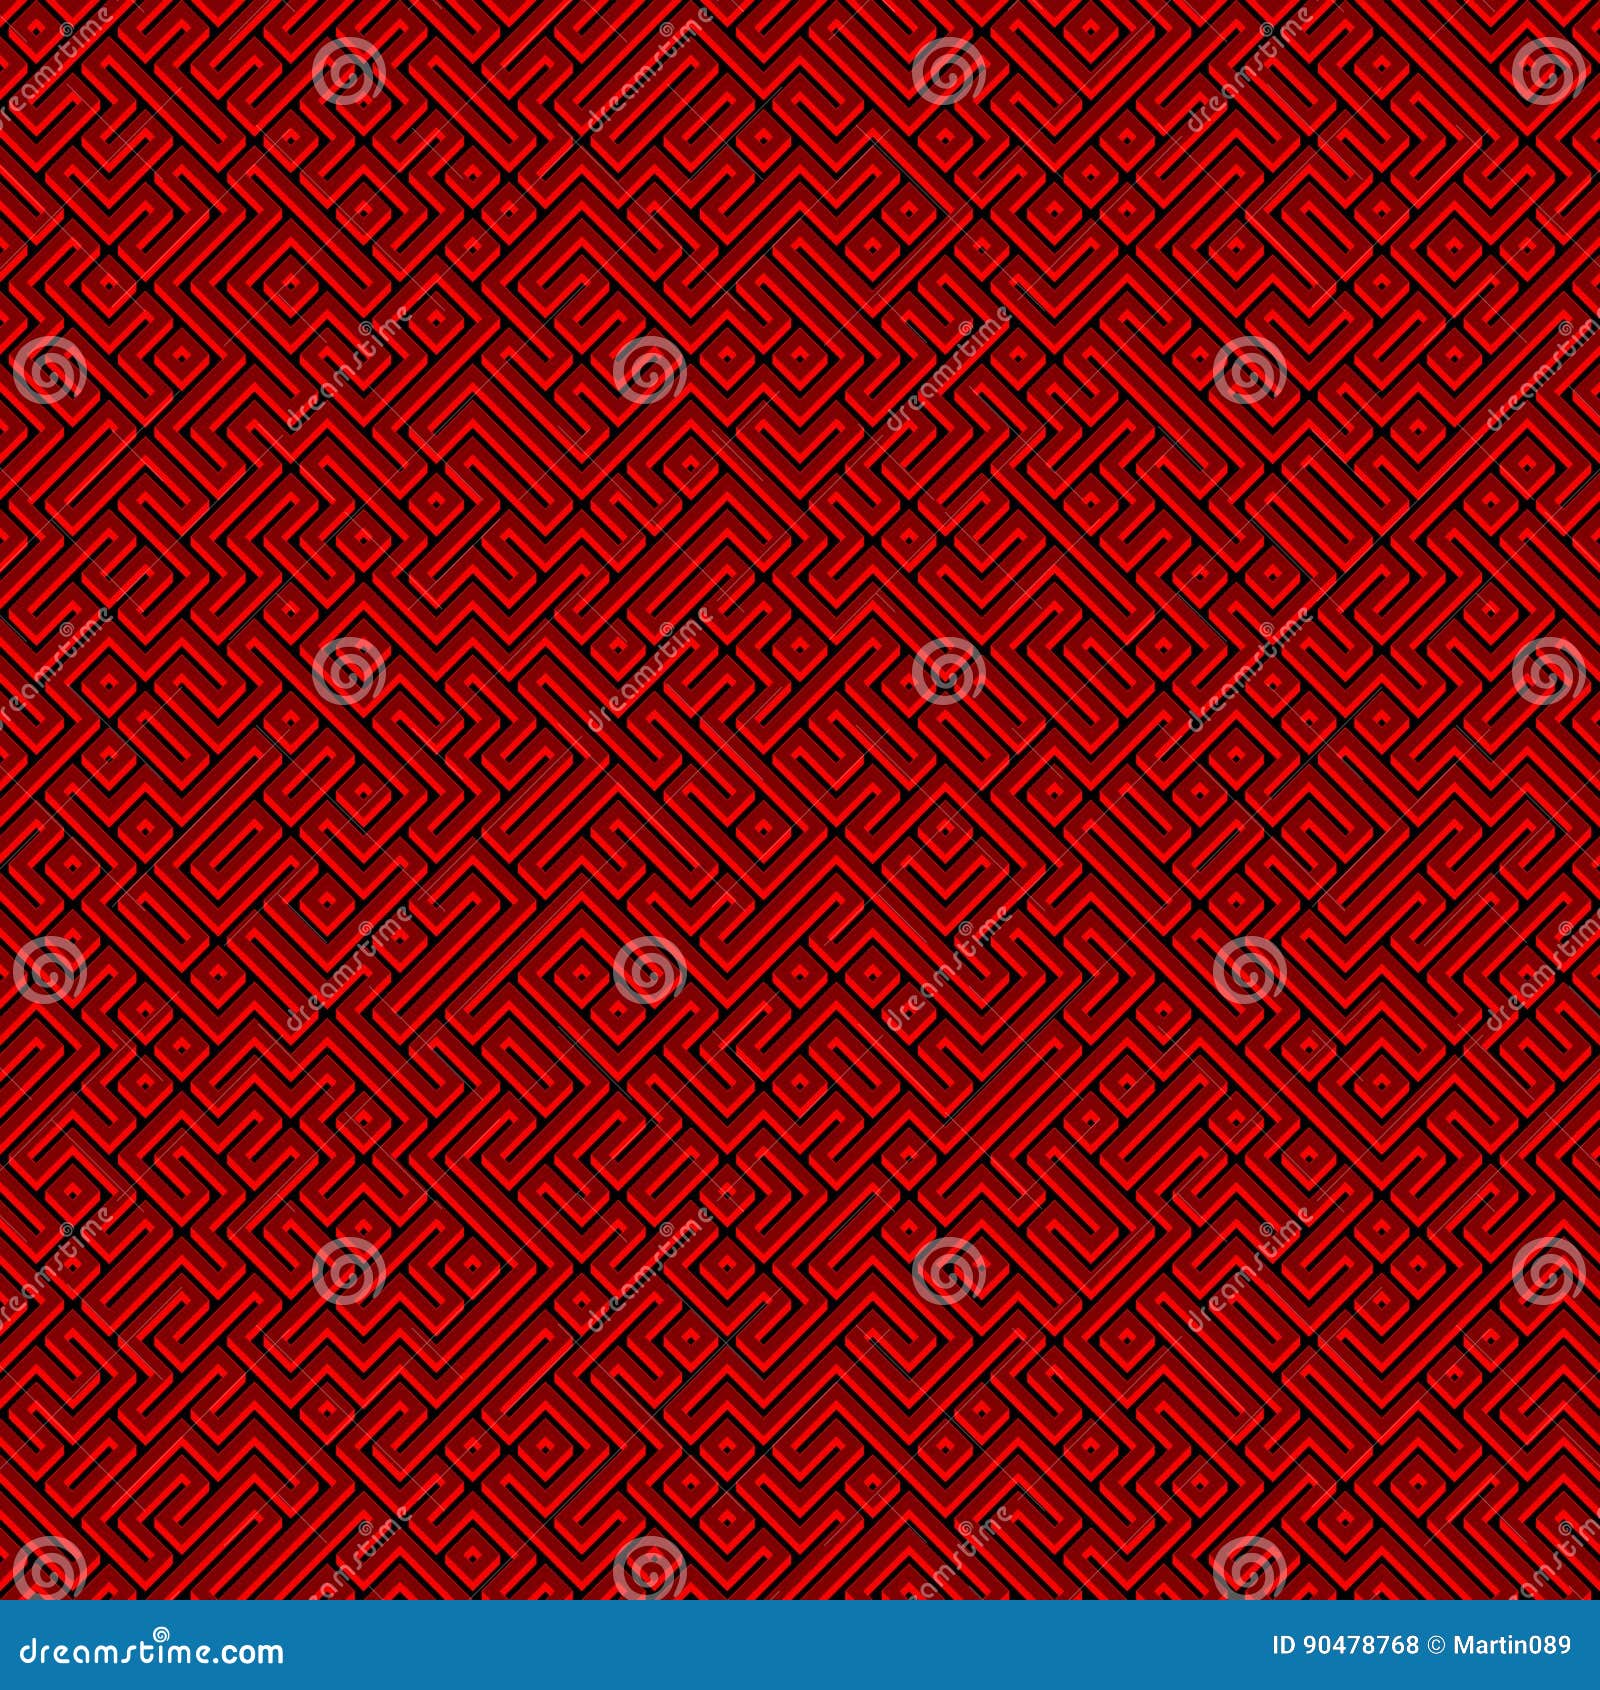 Abstract Seamless Red Maze Pattern Stock Illustration - Illustration of ...